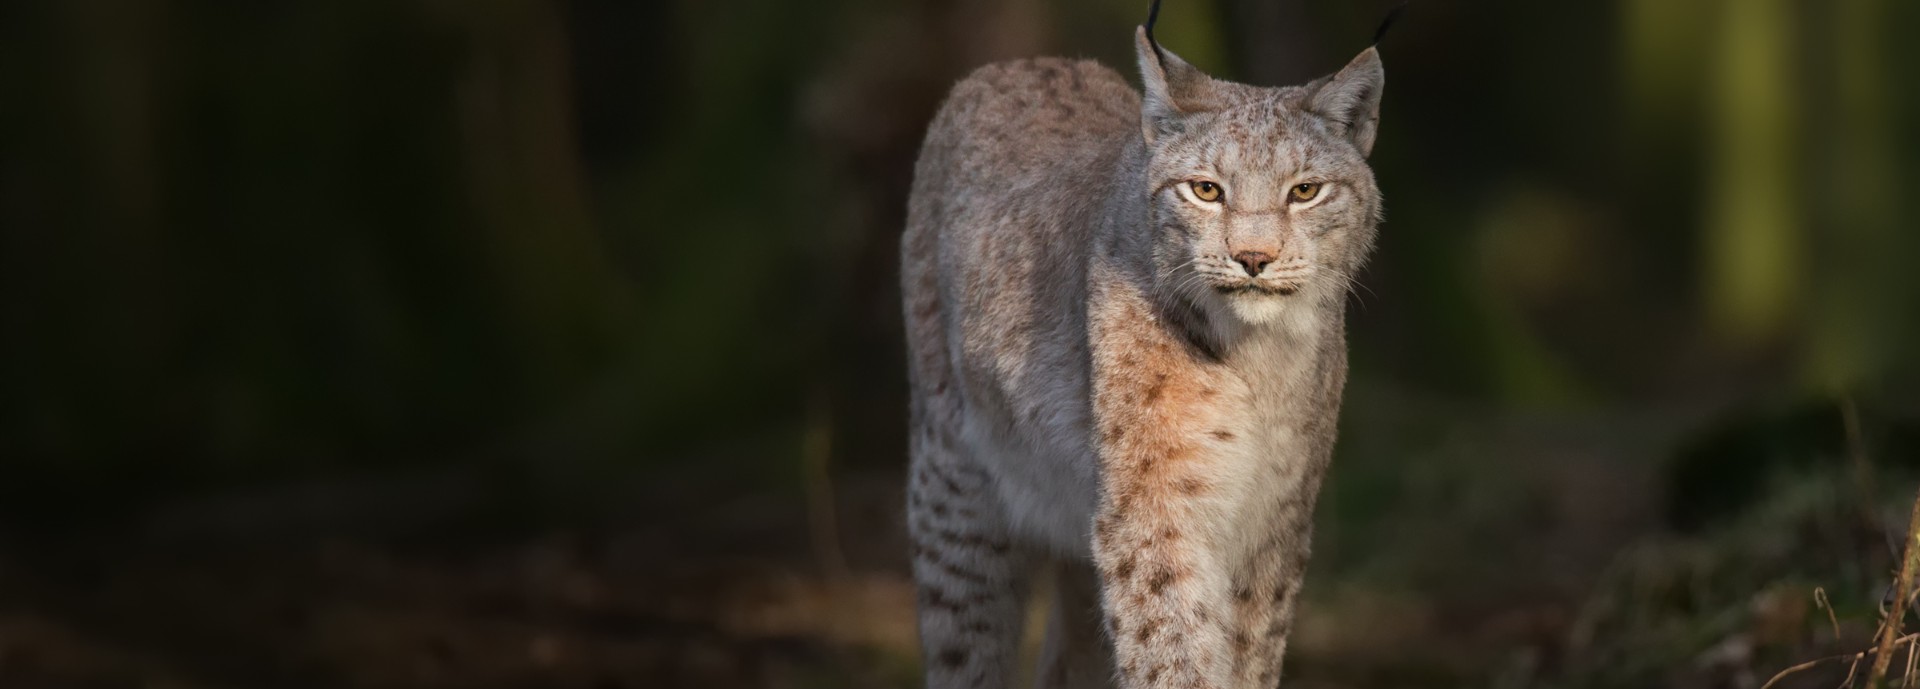 New study models the proposed reintroduction of the Eurasian lynx to  Scotland | About | University of Stirling